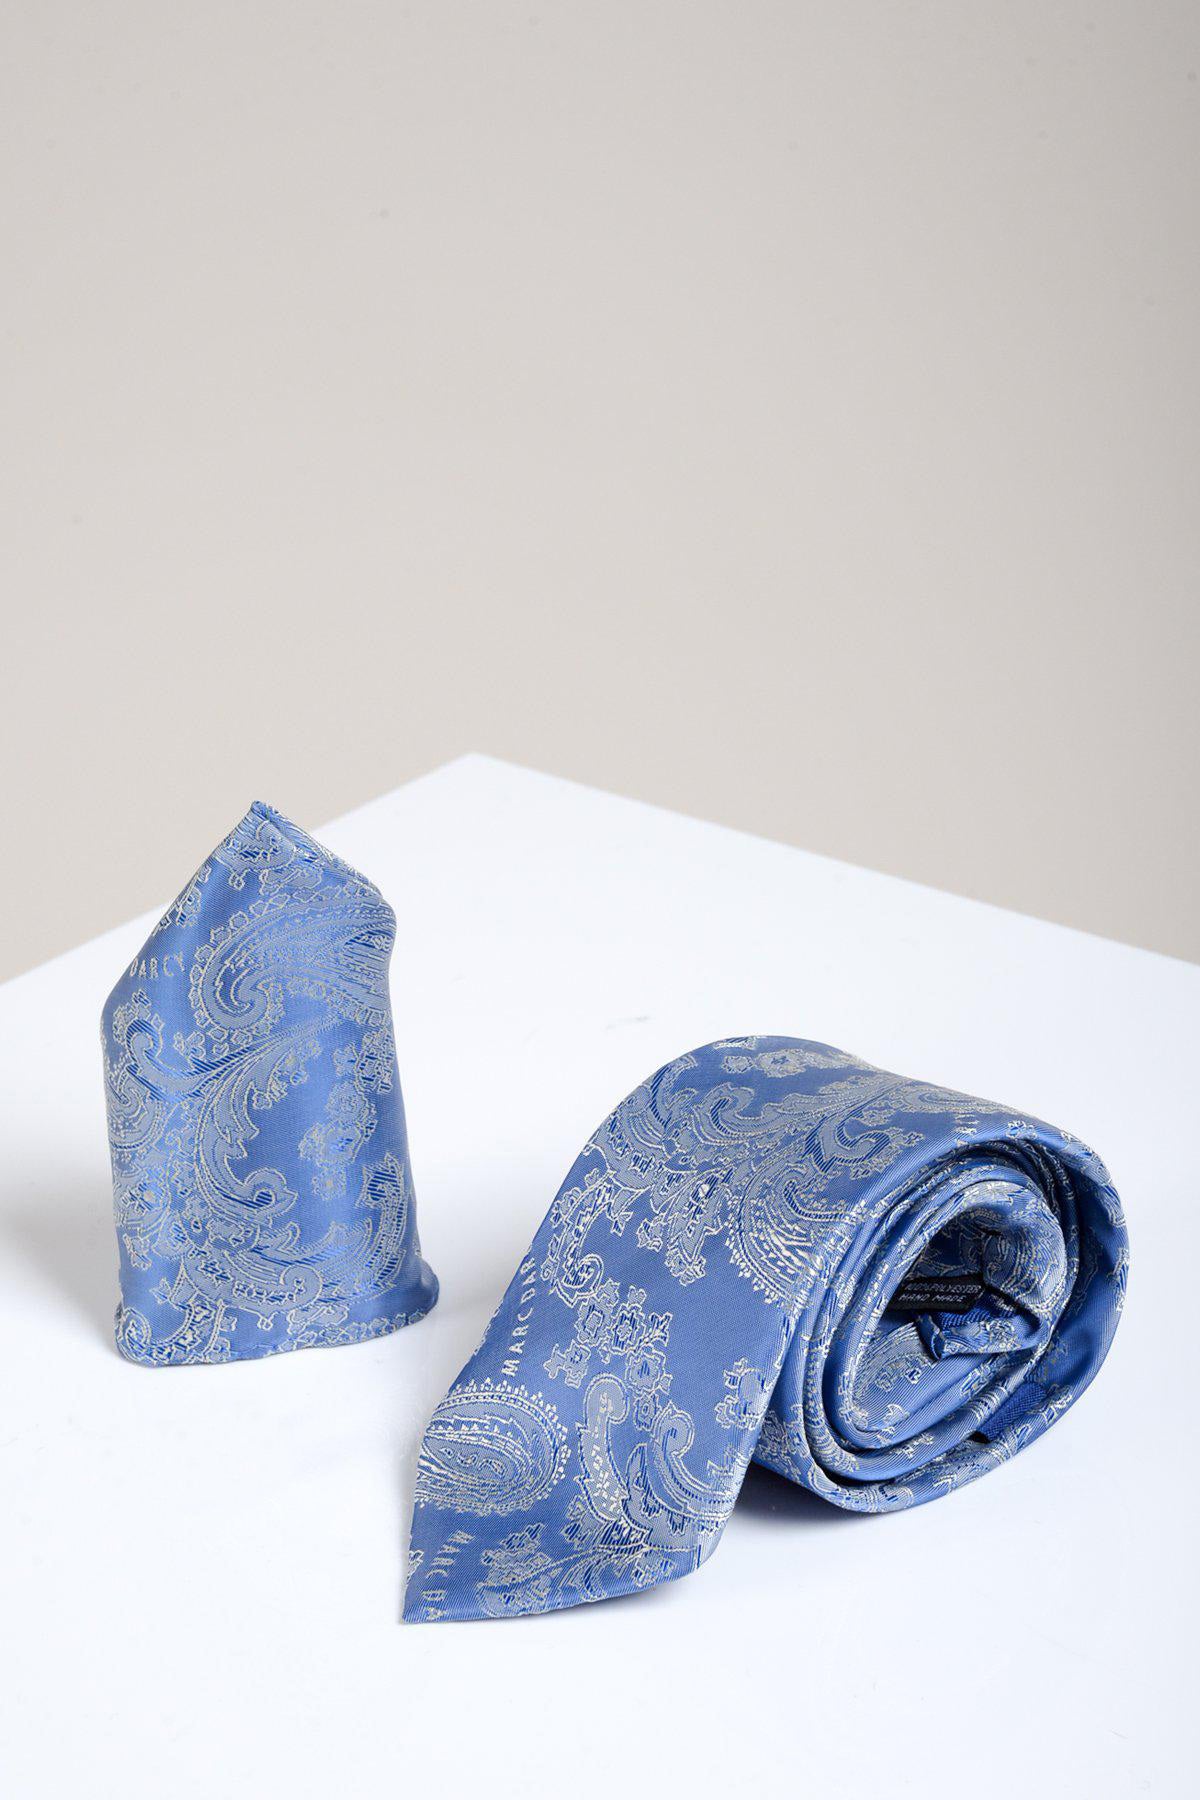 MD PAISLEY - Sky Blue Paisley Tie and Pocket Square Set